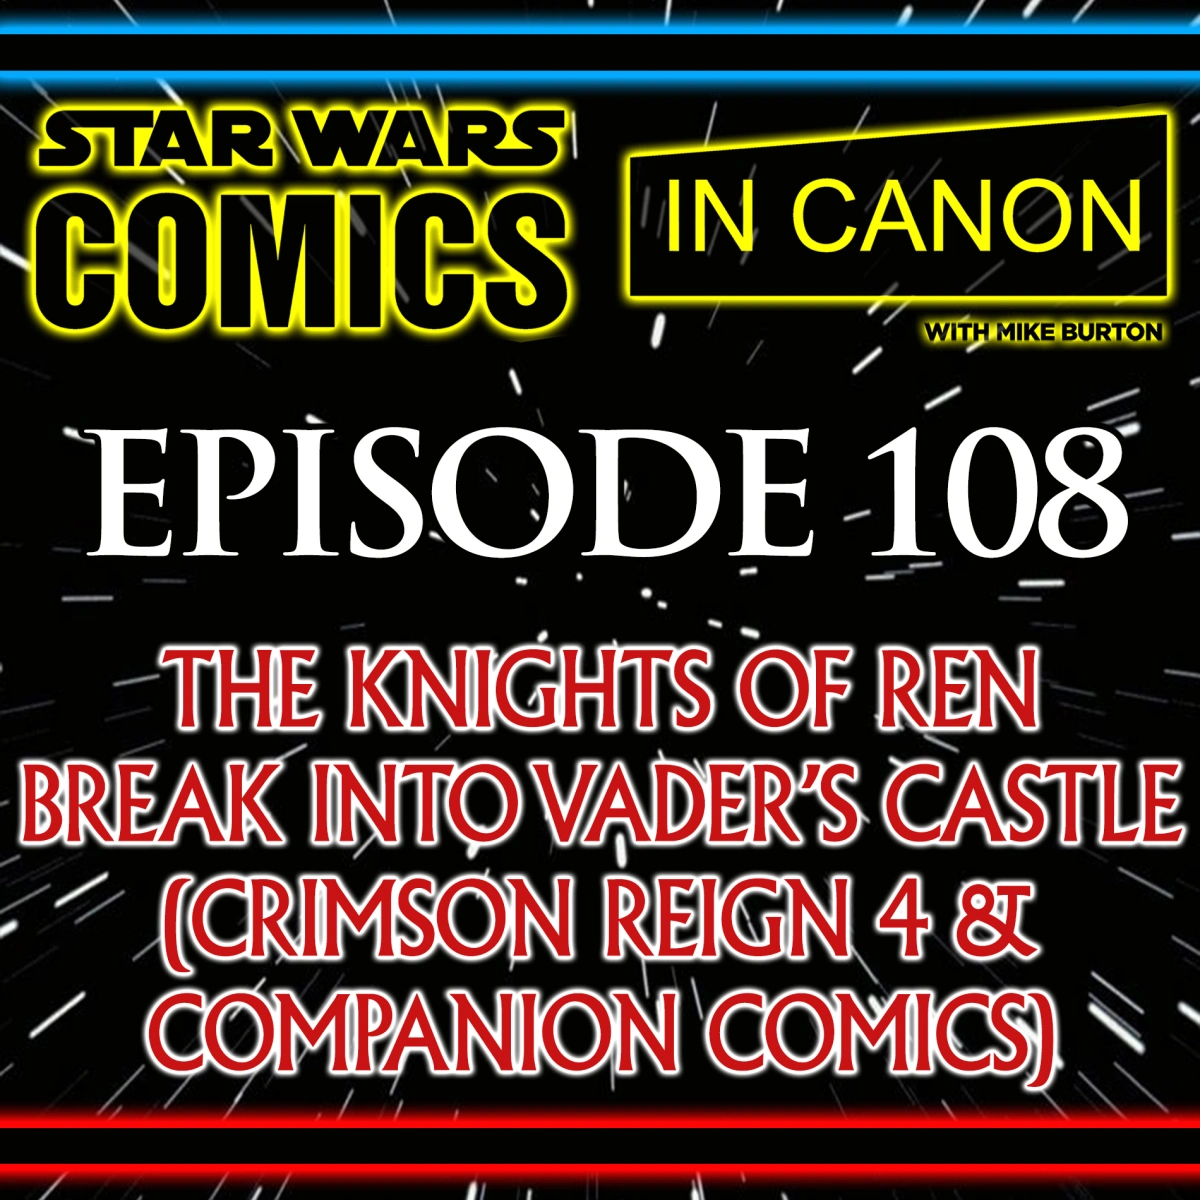 Star Wars: Comics In Canon – Crimson Reign 4: Knights Of Ren Break Into Vader’s Castle, Plus Aphra Gets The Spark Eternal, Sabé & Ochi Plot Against The Empire And The Rebellion Is Attacked – (BH22, CR4, DV22, SW23 & DA20) Ep 108